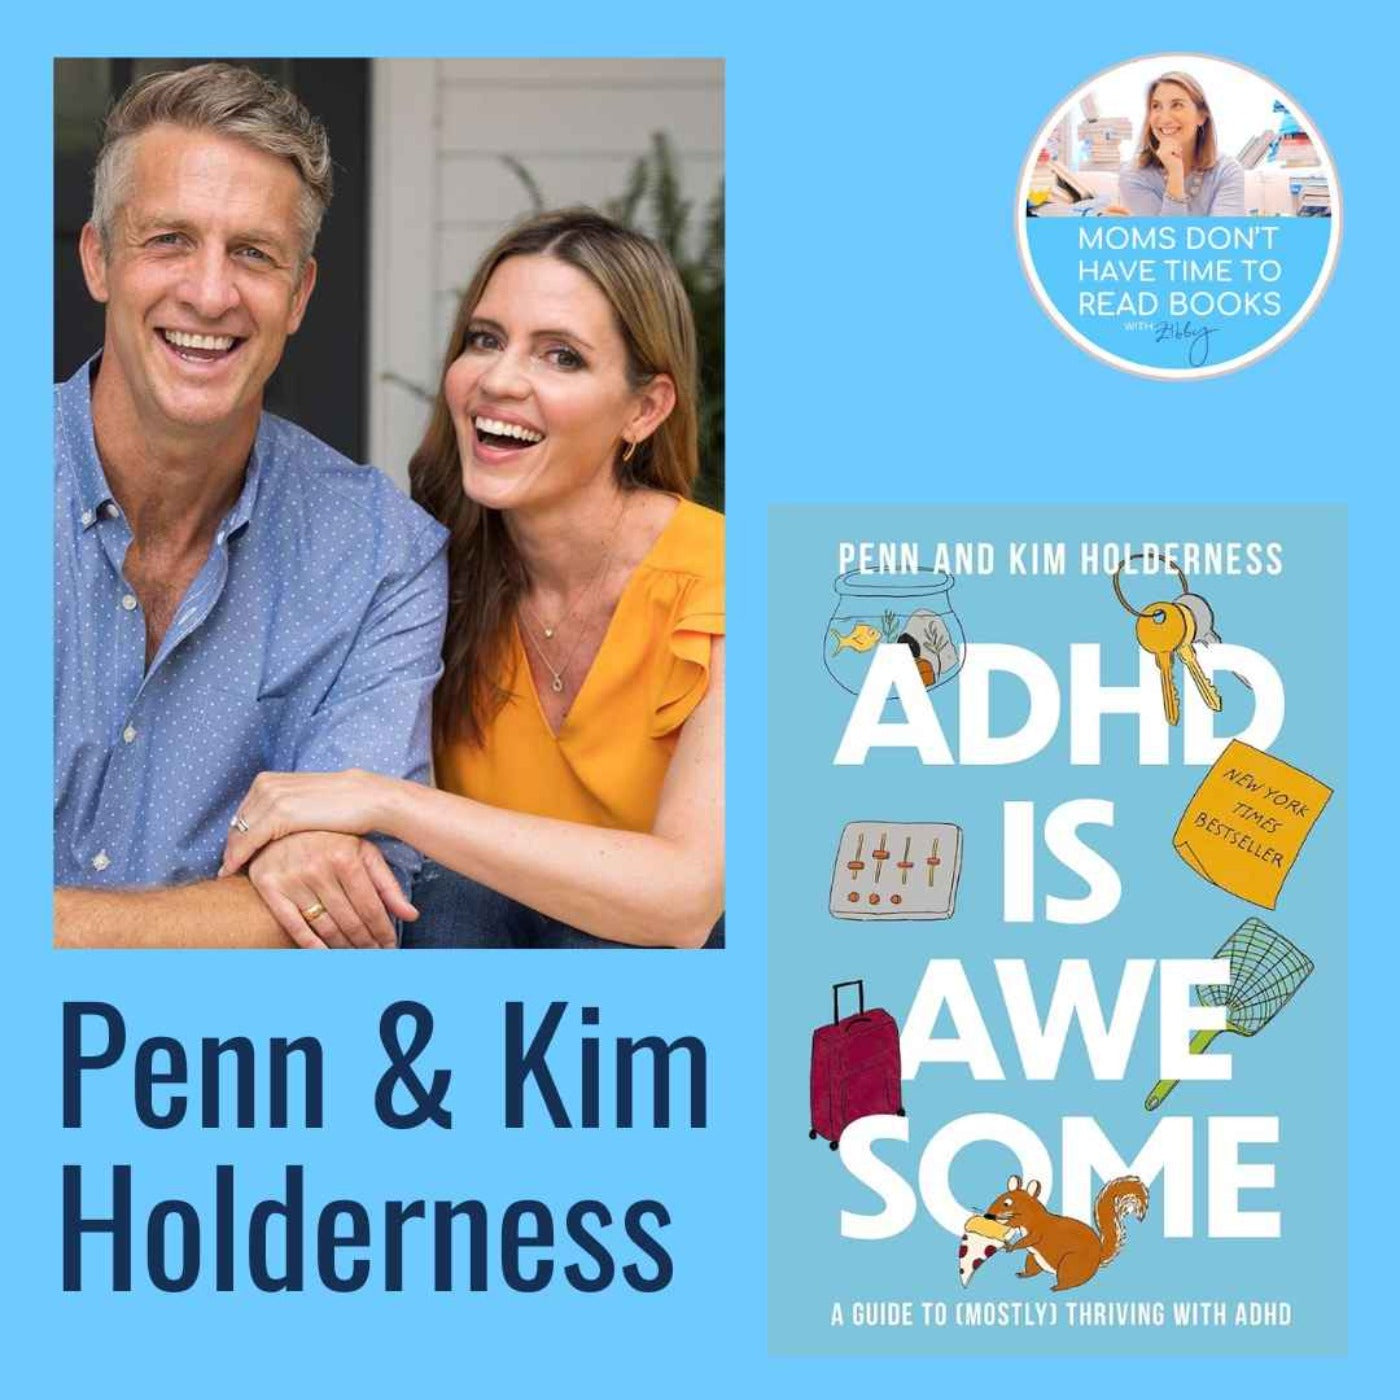 Kim and Penn Holderness, ADHD IS AWESOME